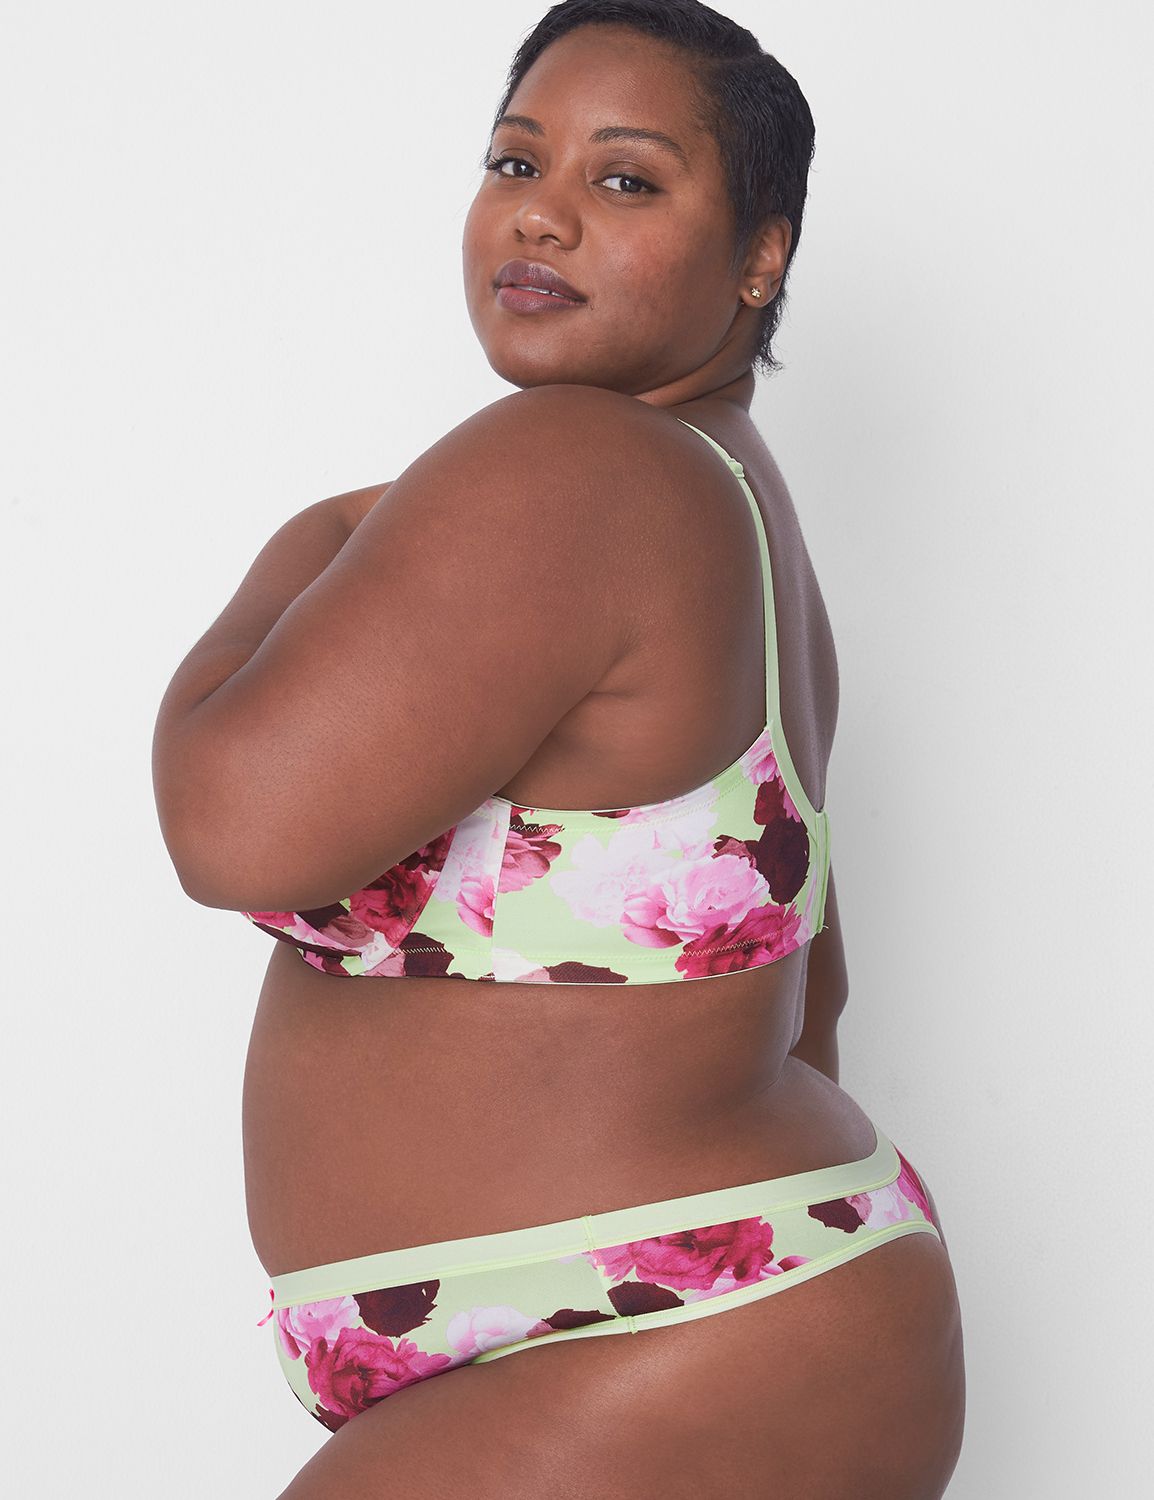 Lane Bryant - Bras you (& your boobs) will love? Meaghan P O